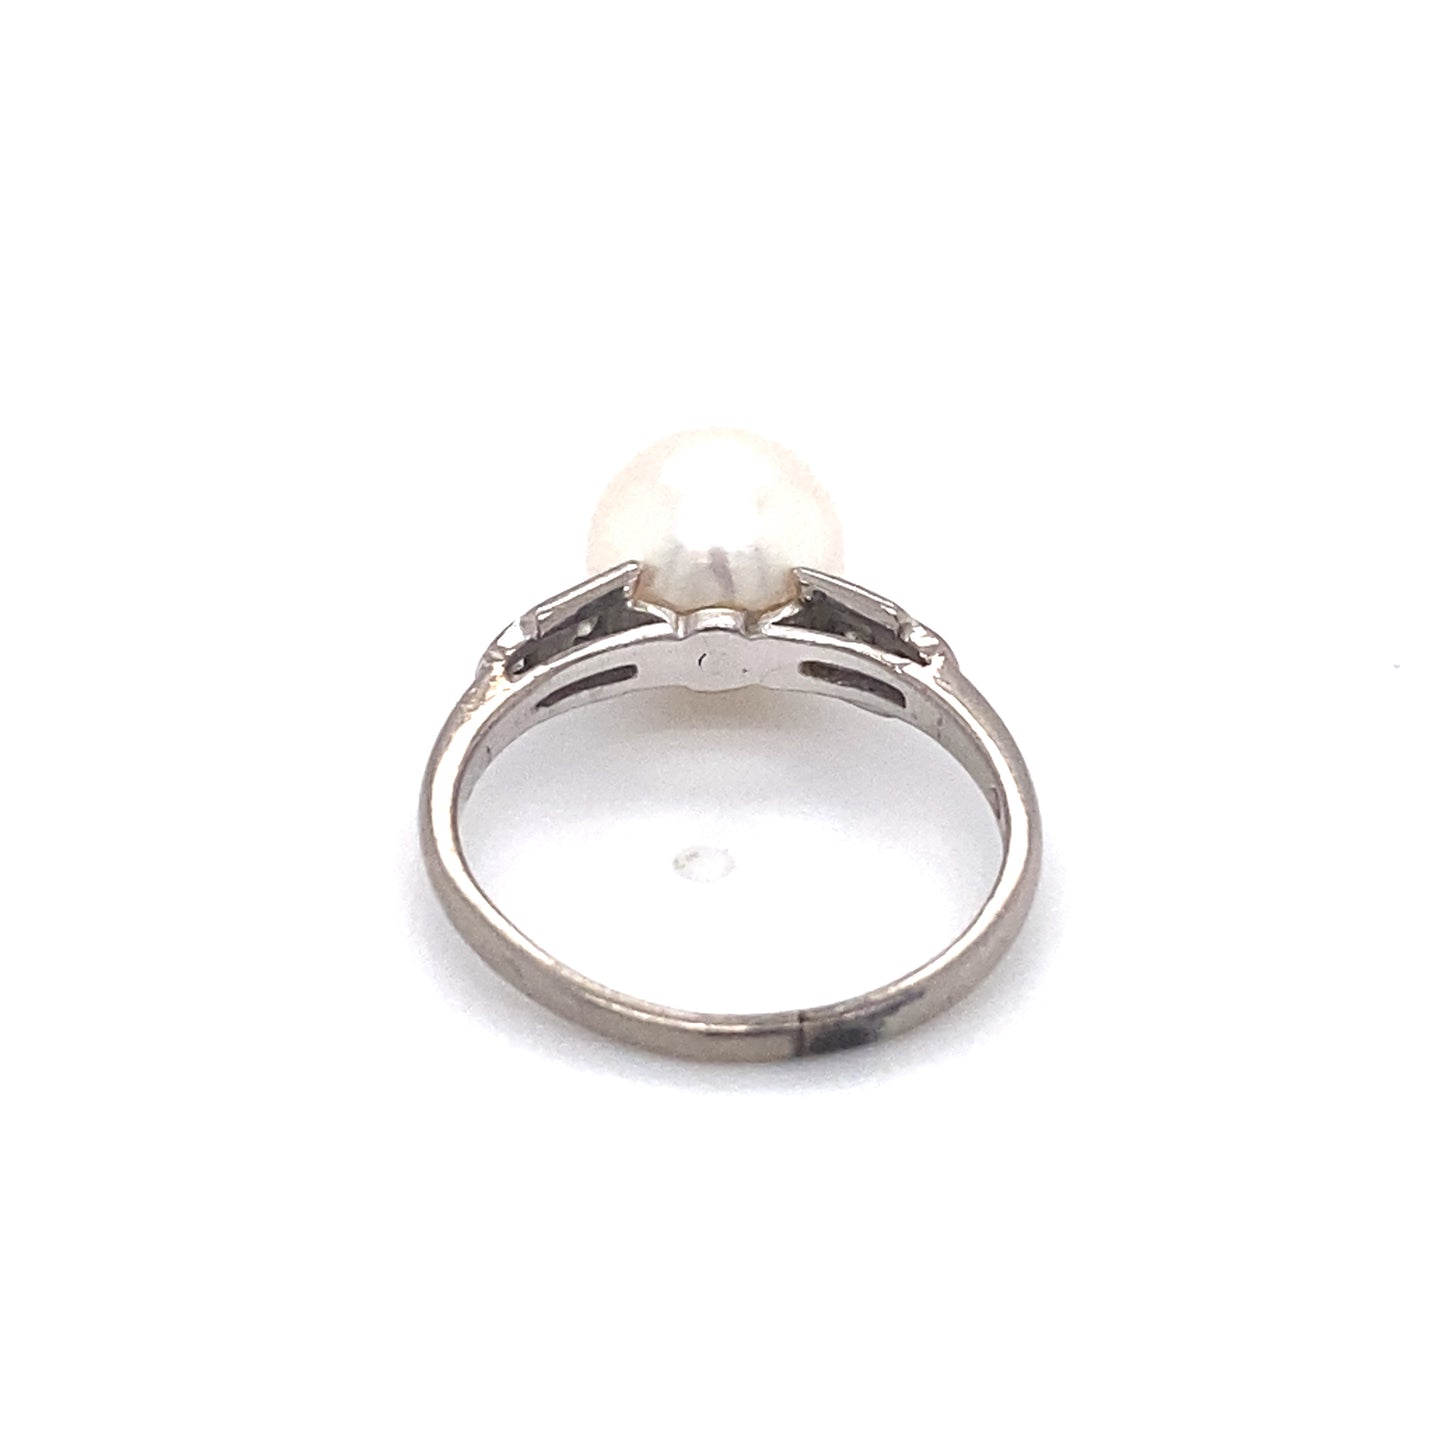 Circa 1940s Mikimoto 8.5mm Pearl and Diamond Ring in 14K White Gold